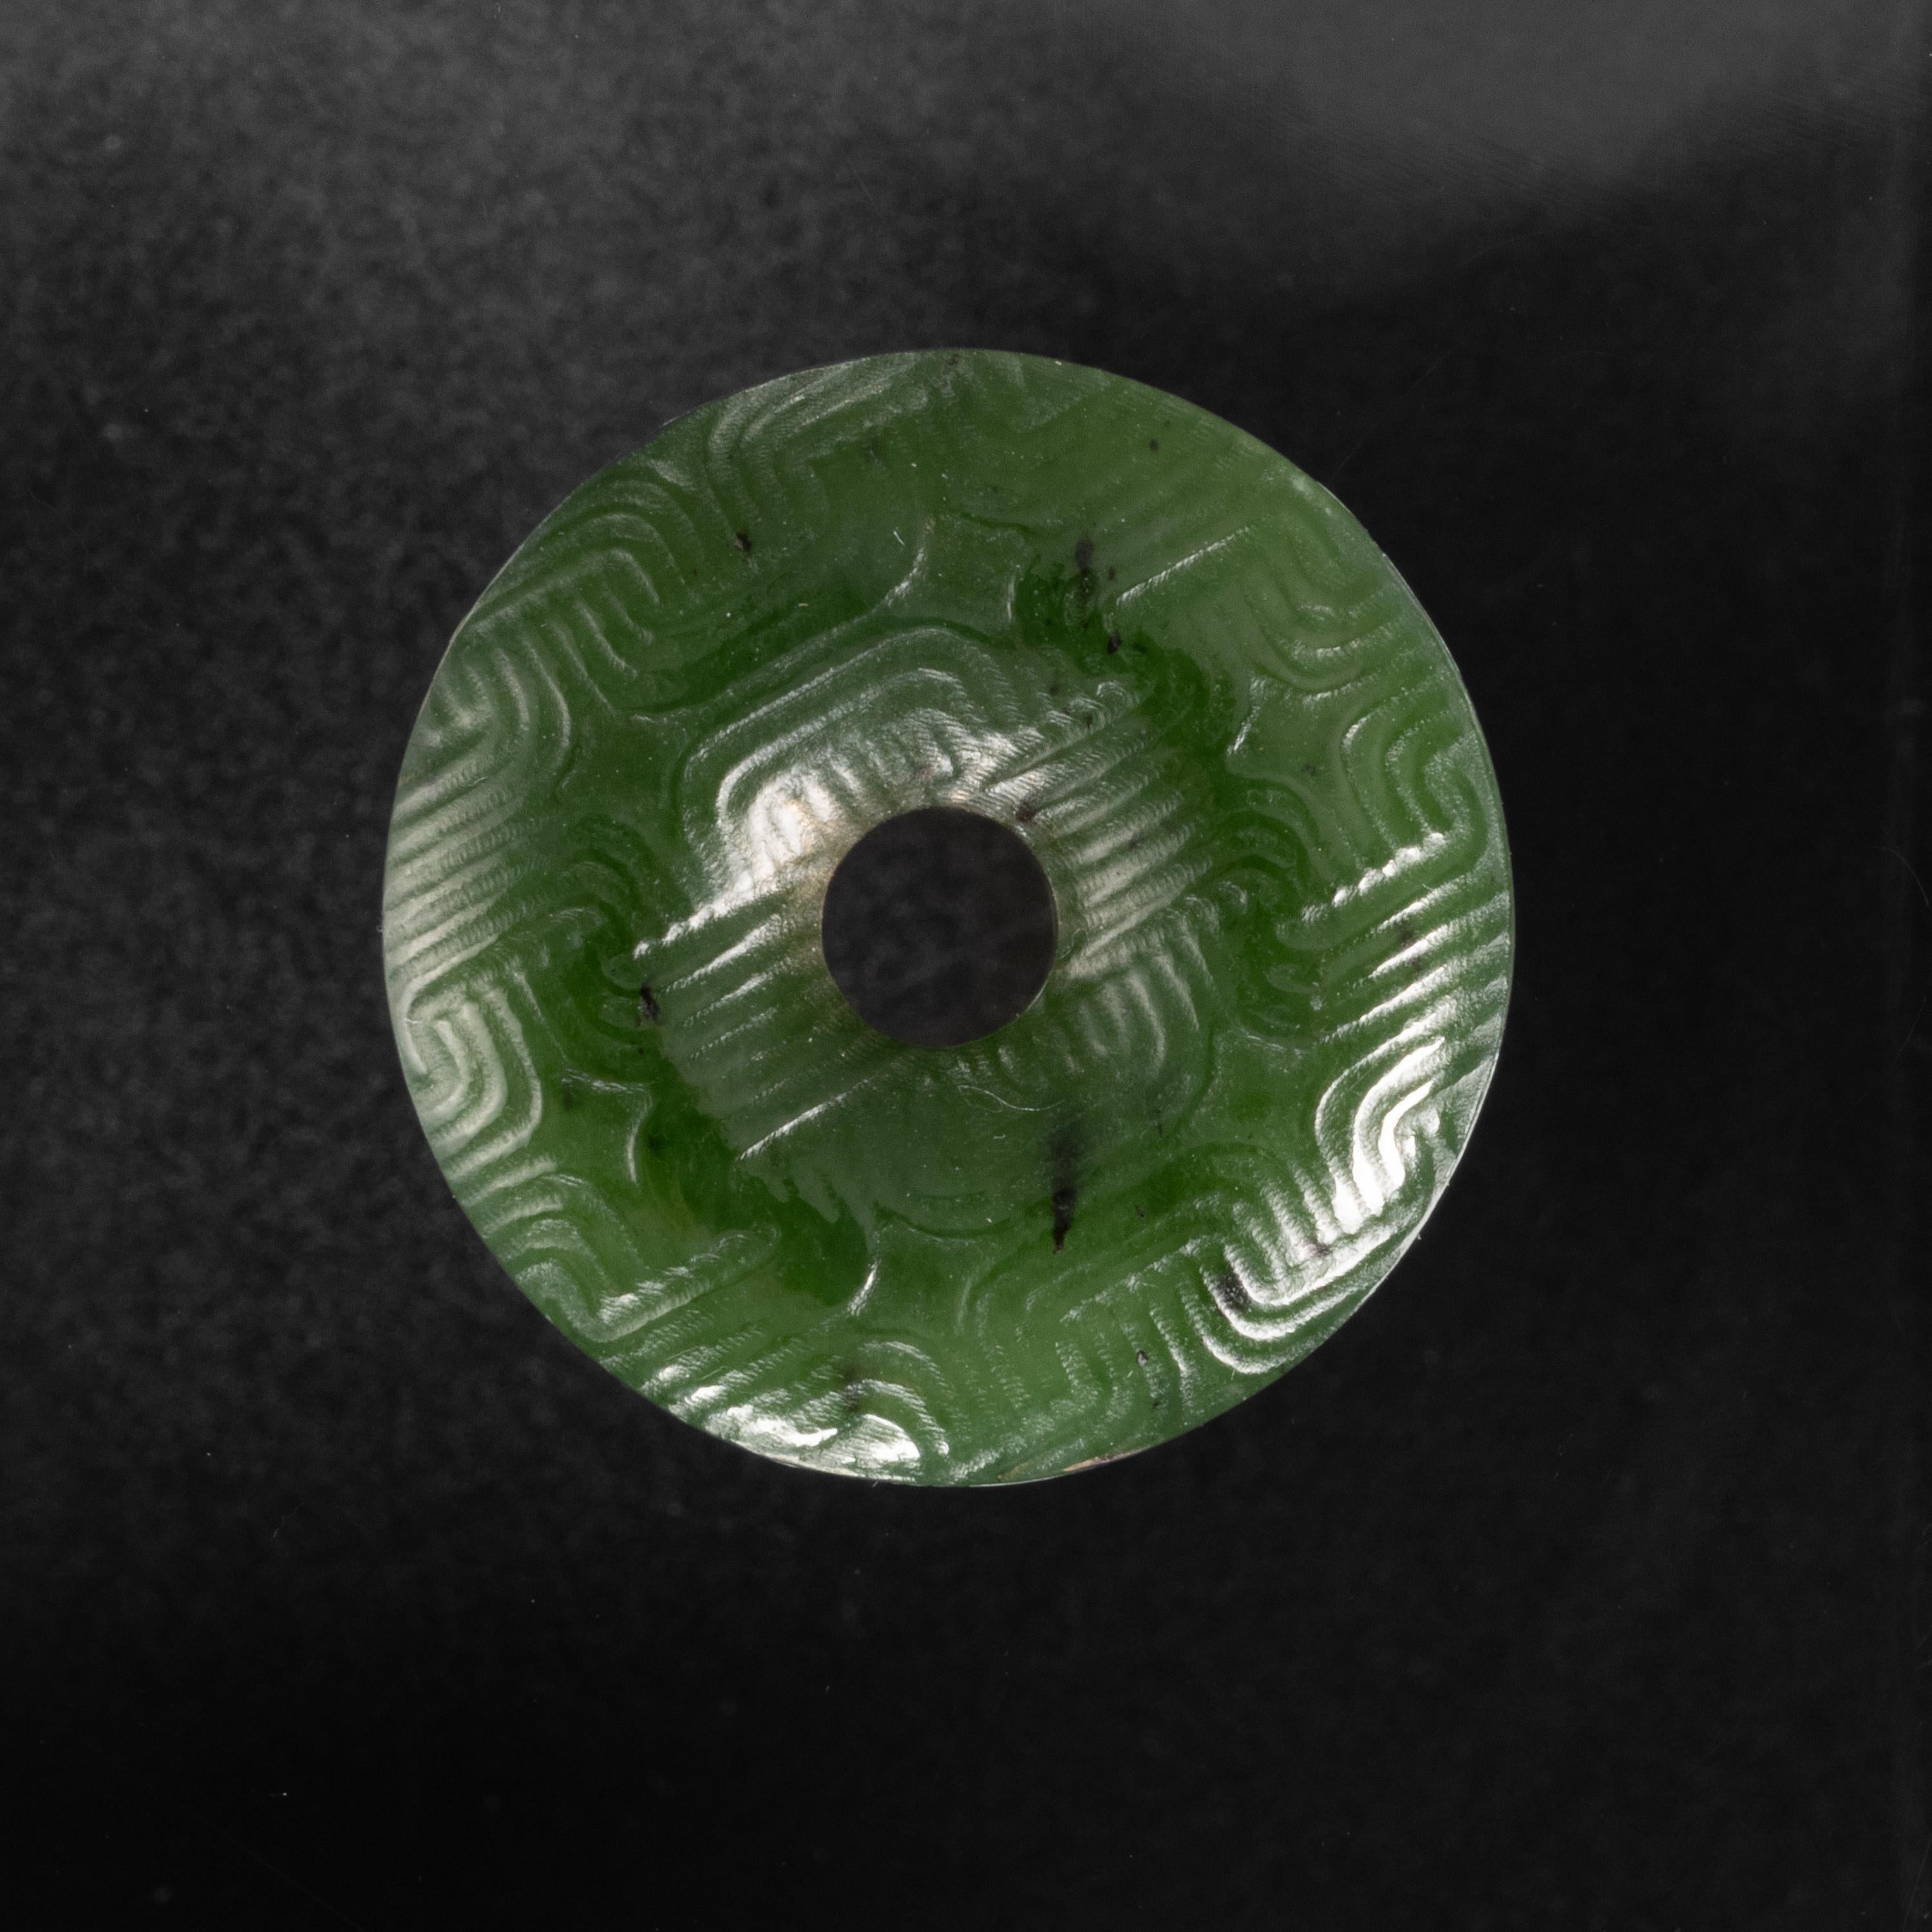 What is being said in the geometric language we see so precisely inscribed into the surface of this jade bi disc? Look closely and you will see the enduring tool marks: shaggy grooves made by a stick of bamboo that had been first dipped into a paste